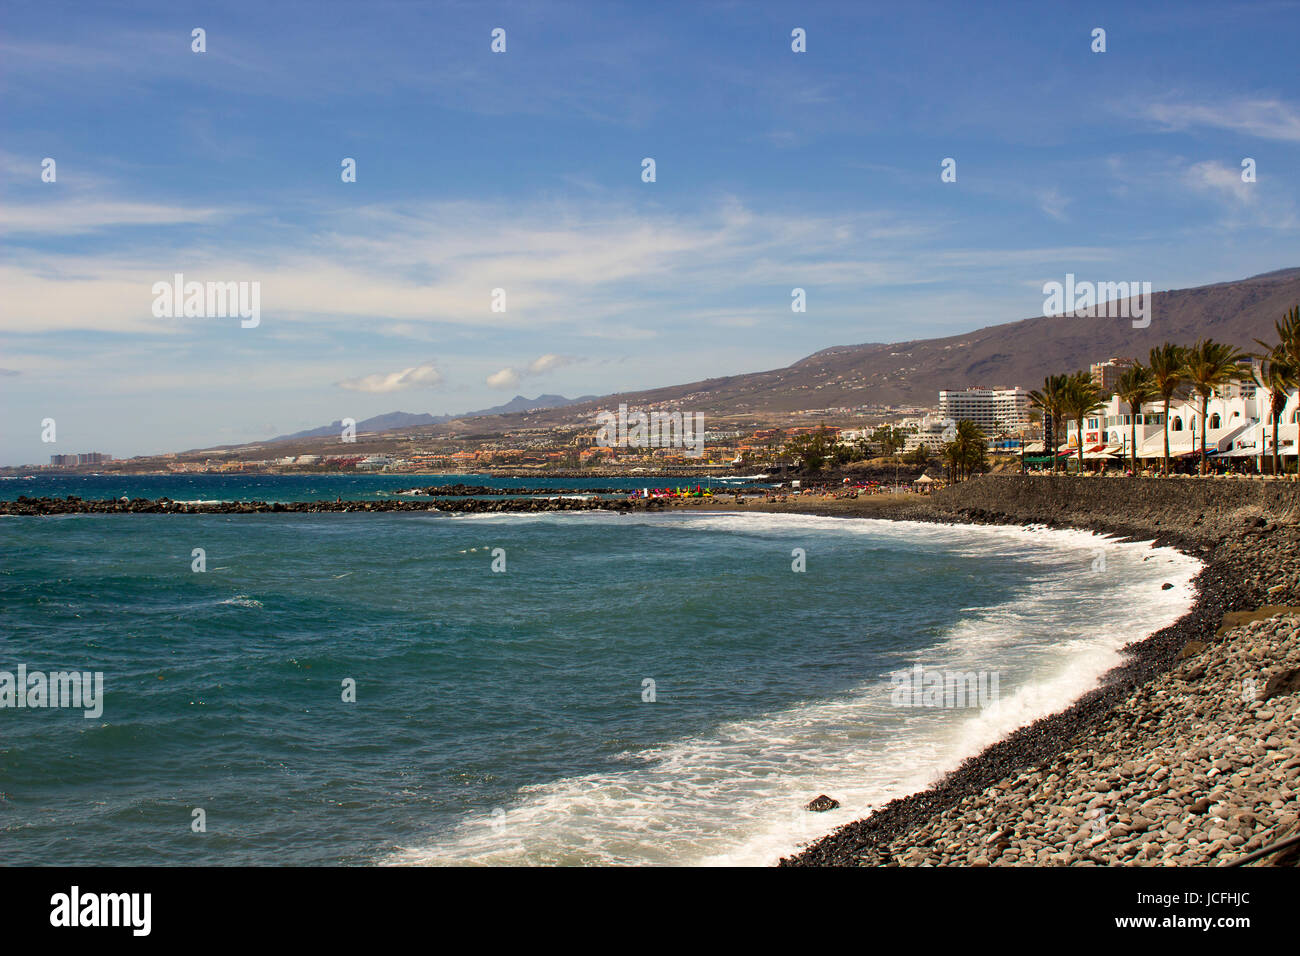 The sunny bay with white waves breaking in the shore at Playa Las Americas in Teneriffe in the Spanish Canary Islands Stock Photo